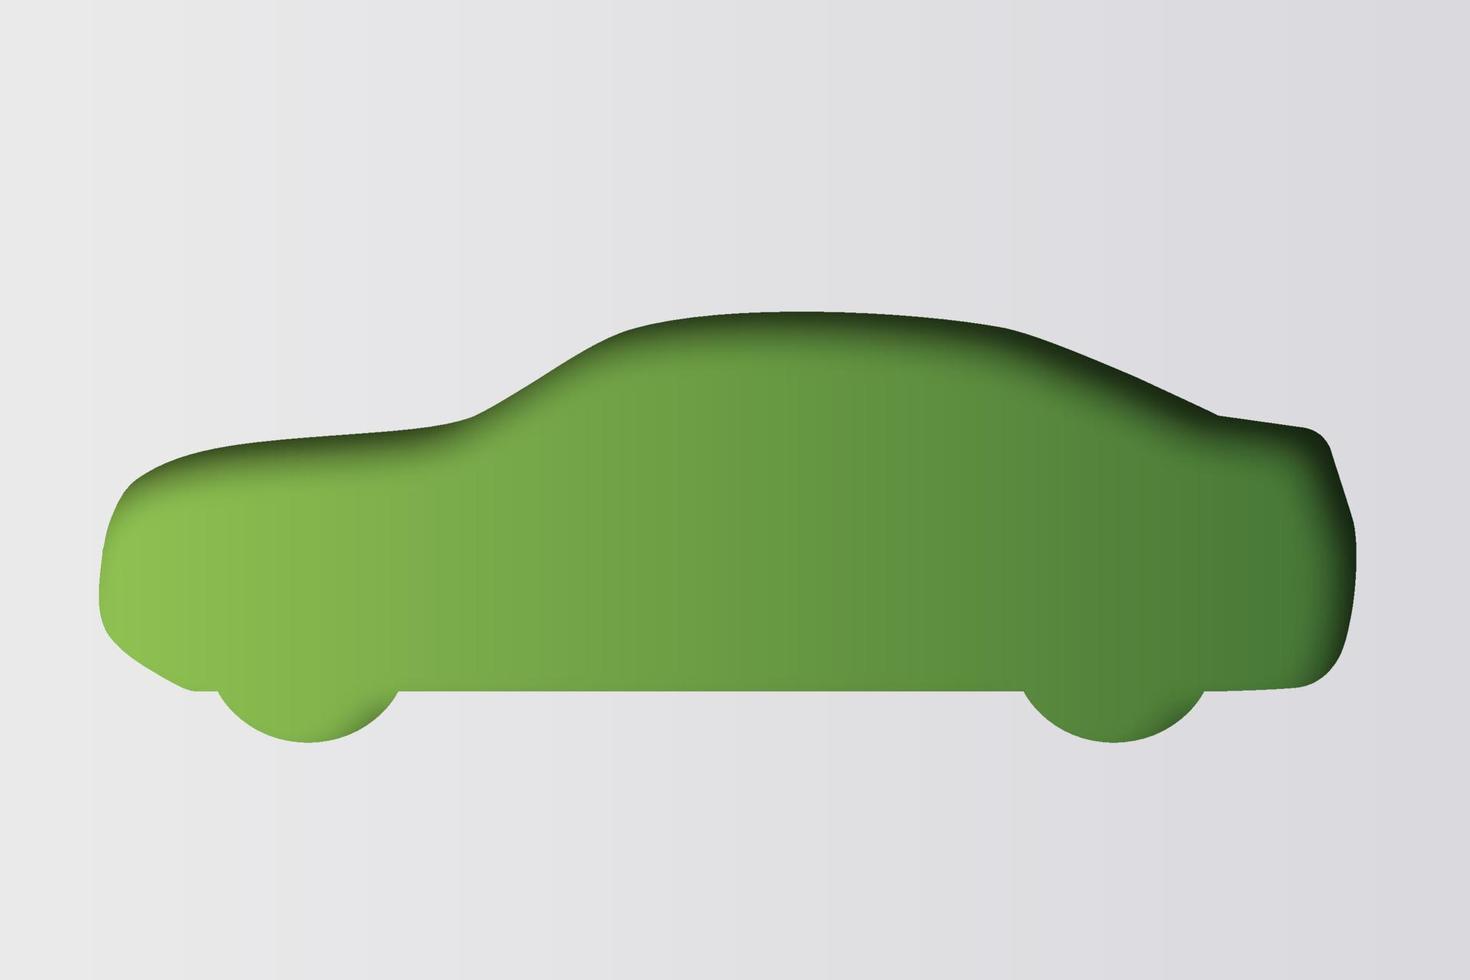 Simple unusual conceptual green car vector illustration in paper cut out style.